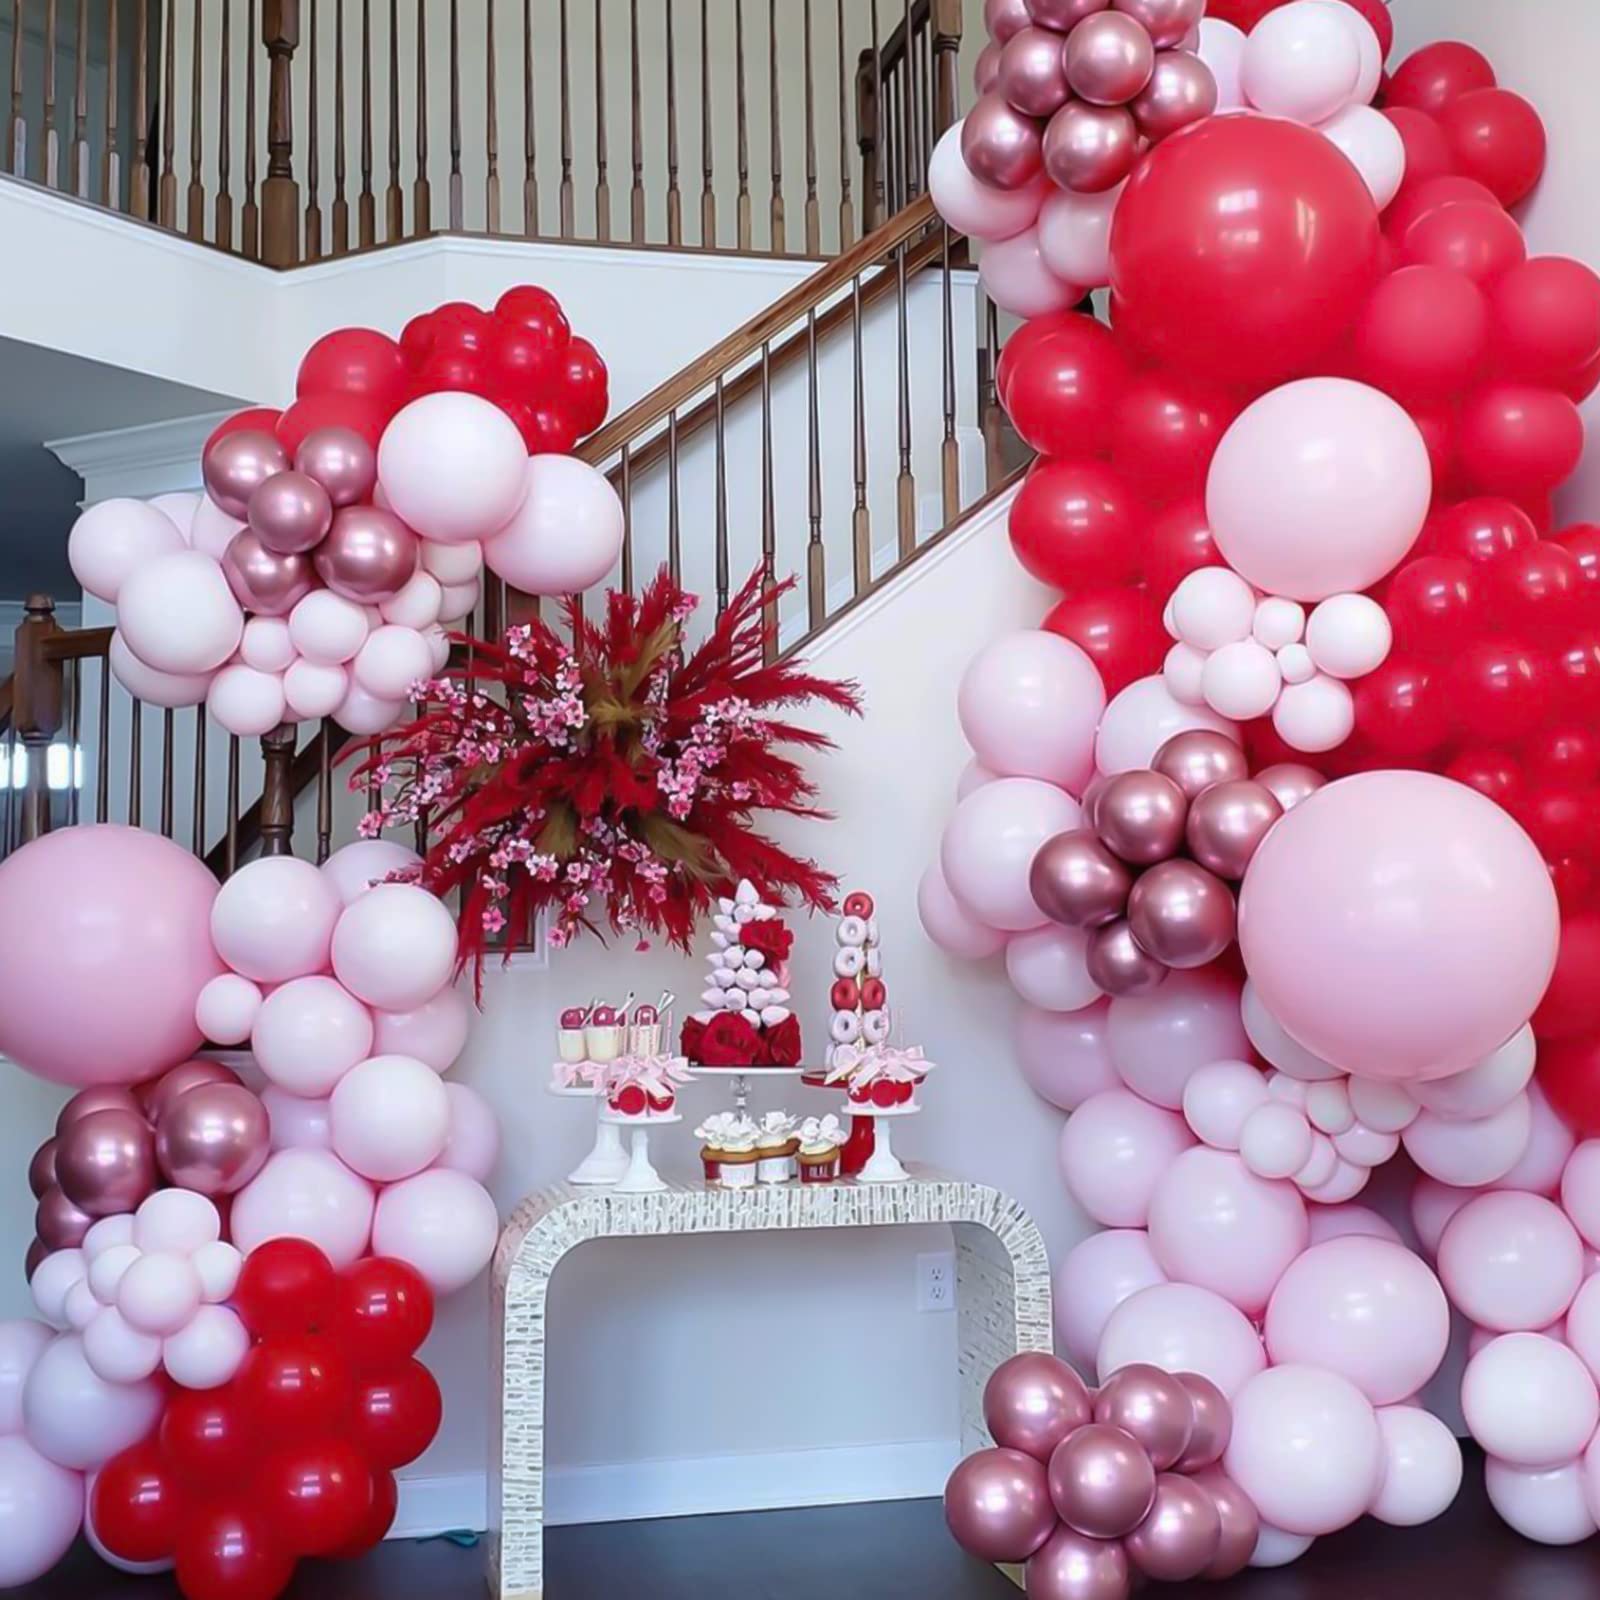 RUBFAC Pink and Ruby Red Balloons Valentine’s Day Different Sizes 105pcs 5/10/12/18 Inch for Garland Arch, Latex Balloons for Birthday Party Wedding Baby Shower Gender Reveal Party Decoration